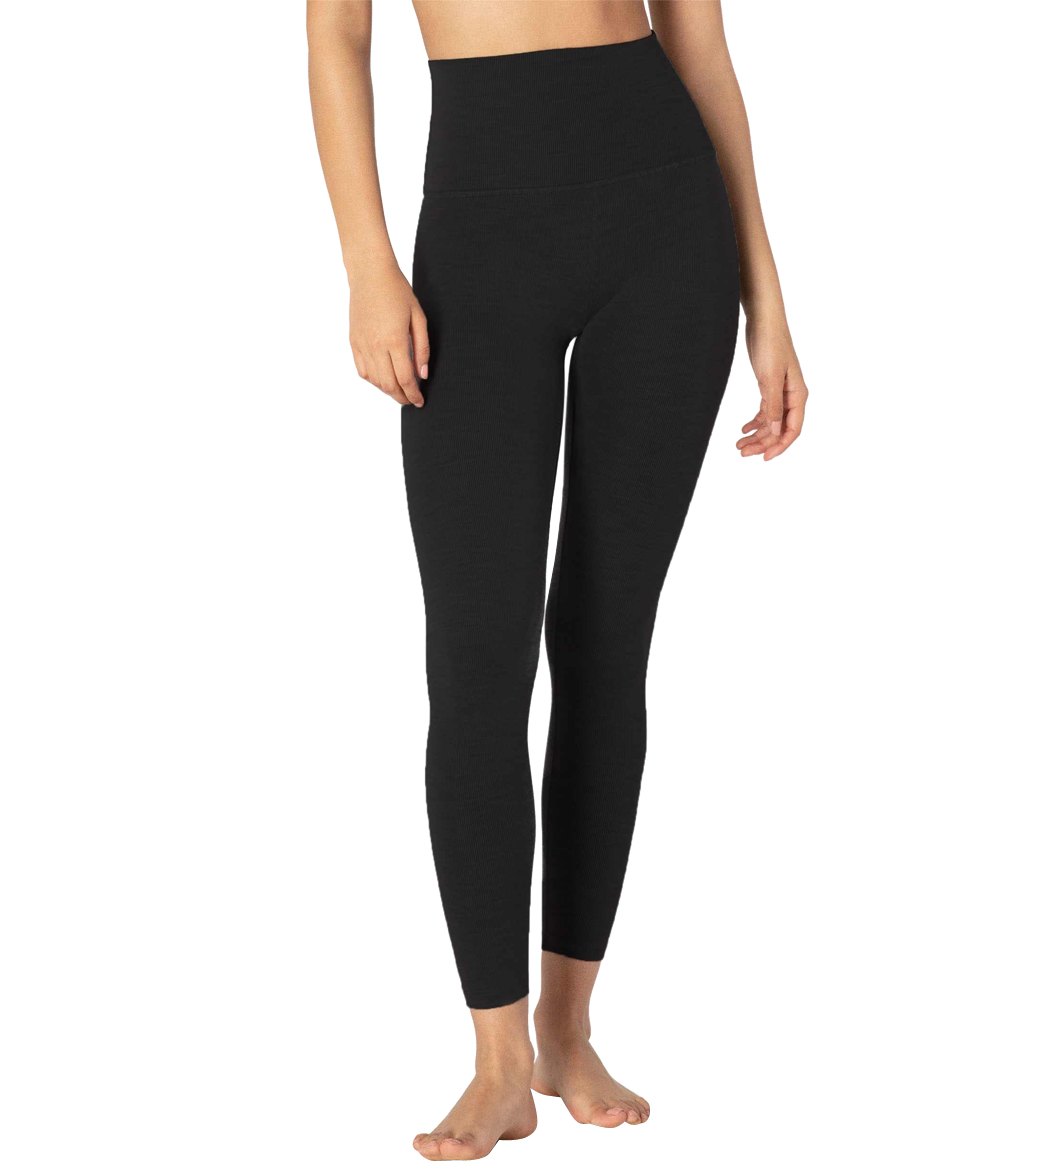 Beyond Yoga Heather Rib High Waisted 7/8 Leggings size M Gray Size M - $41  (65% Off Retail) - From Michelle